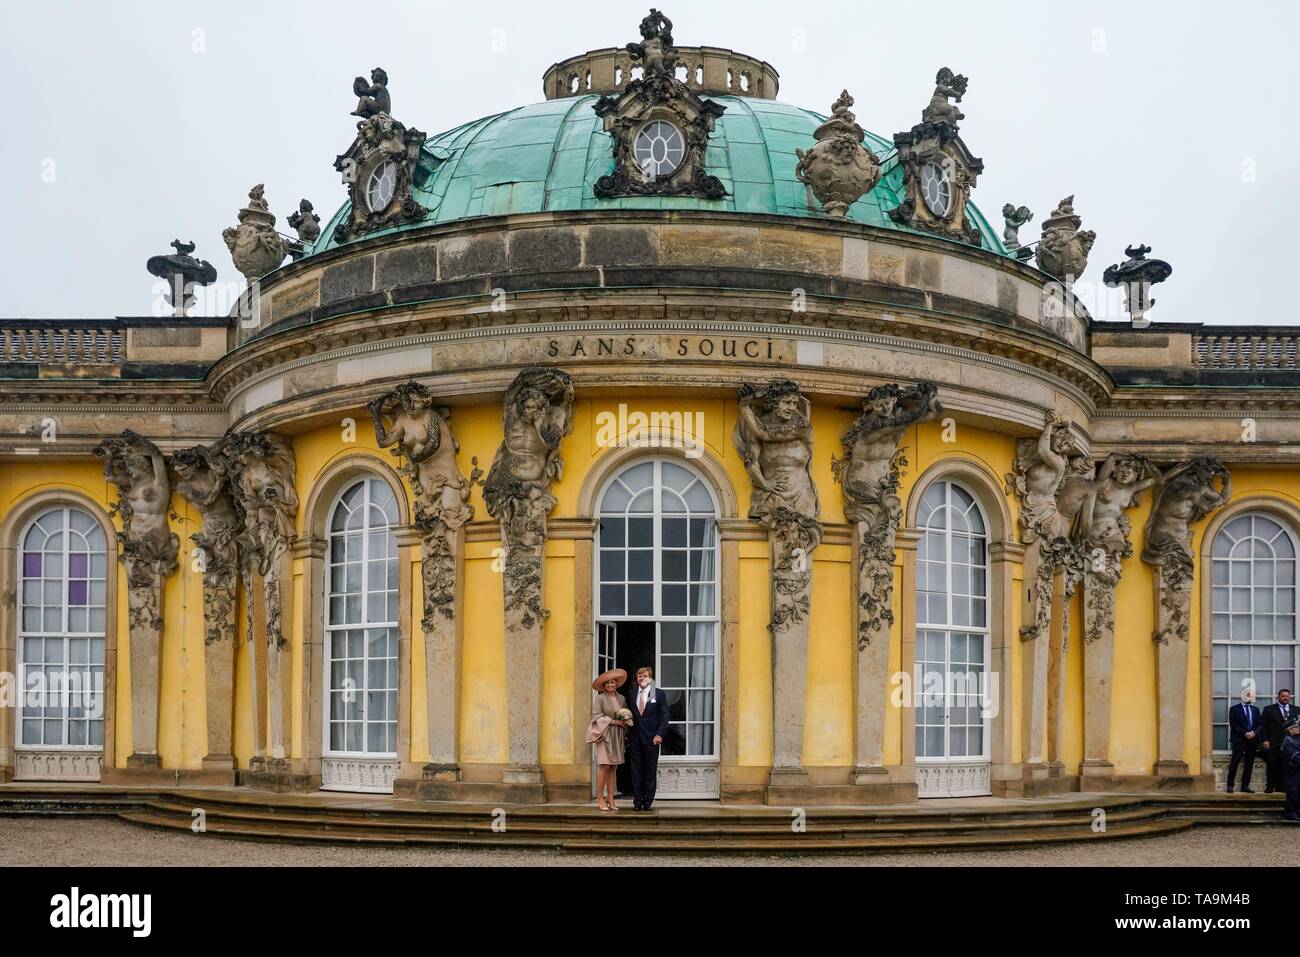 Potsdam, Deutschland. 22nd May, 2019. 22.05.2019, Visit of His Majesty King Willem-Alexander and Her Majesty Queen Máxima of the Netherlands in Potsdam in the State of Brandenburg. Queen Maxima (l) and King Willem-Alexander, in front of Sanssouci Palace. | usage worldwide Credit: dpa/Alamy Live News Stock Photo